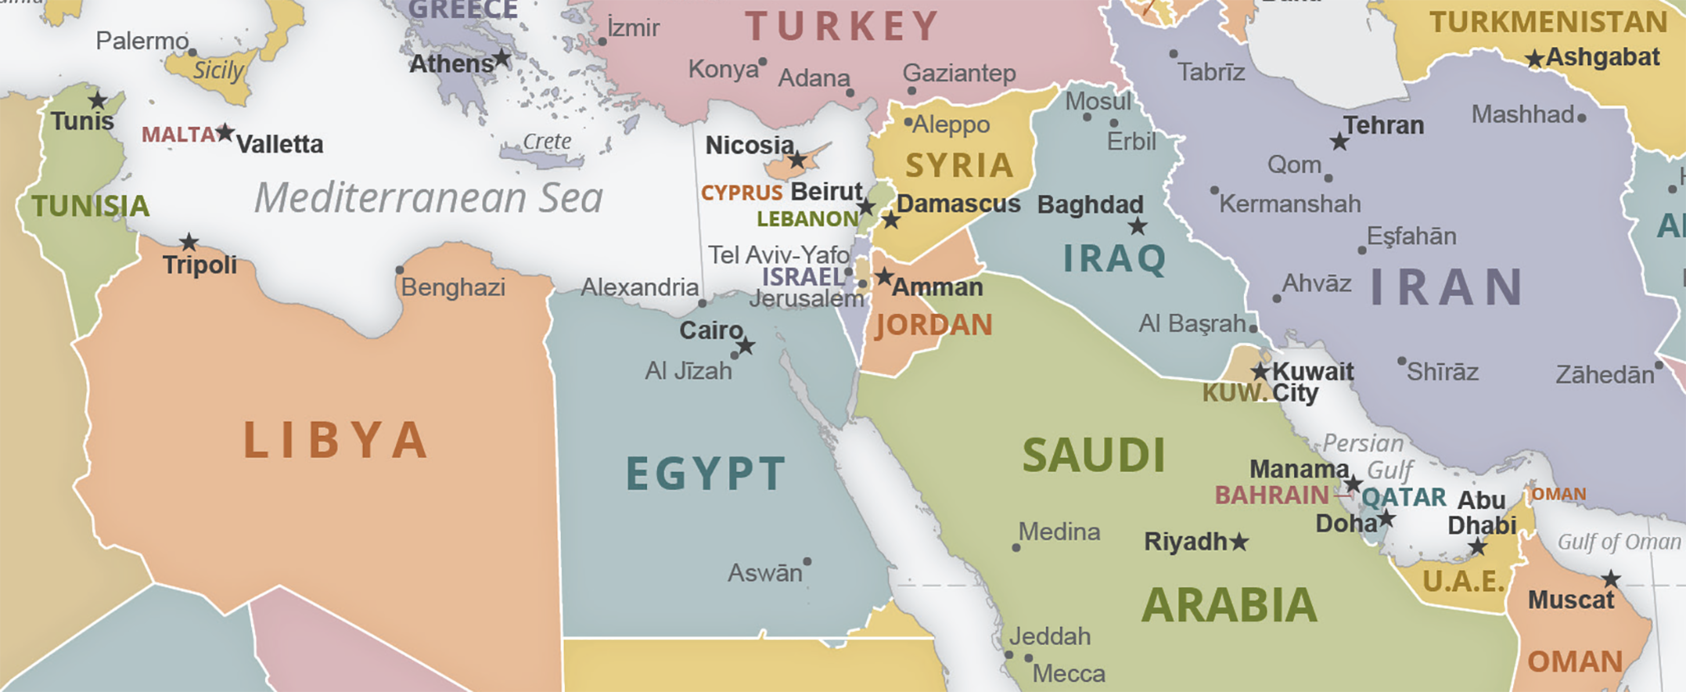 The Middle East: Turmoil and Transition | United States Institute of Peace